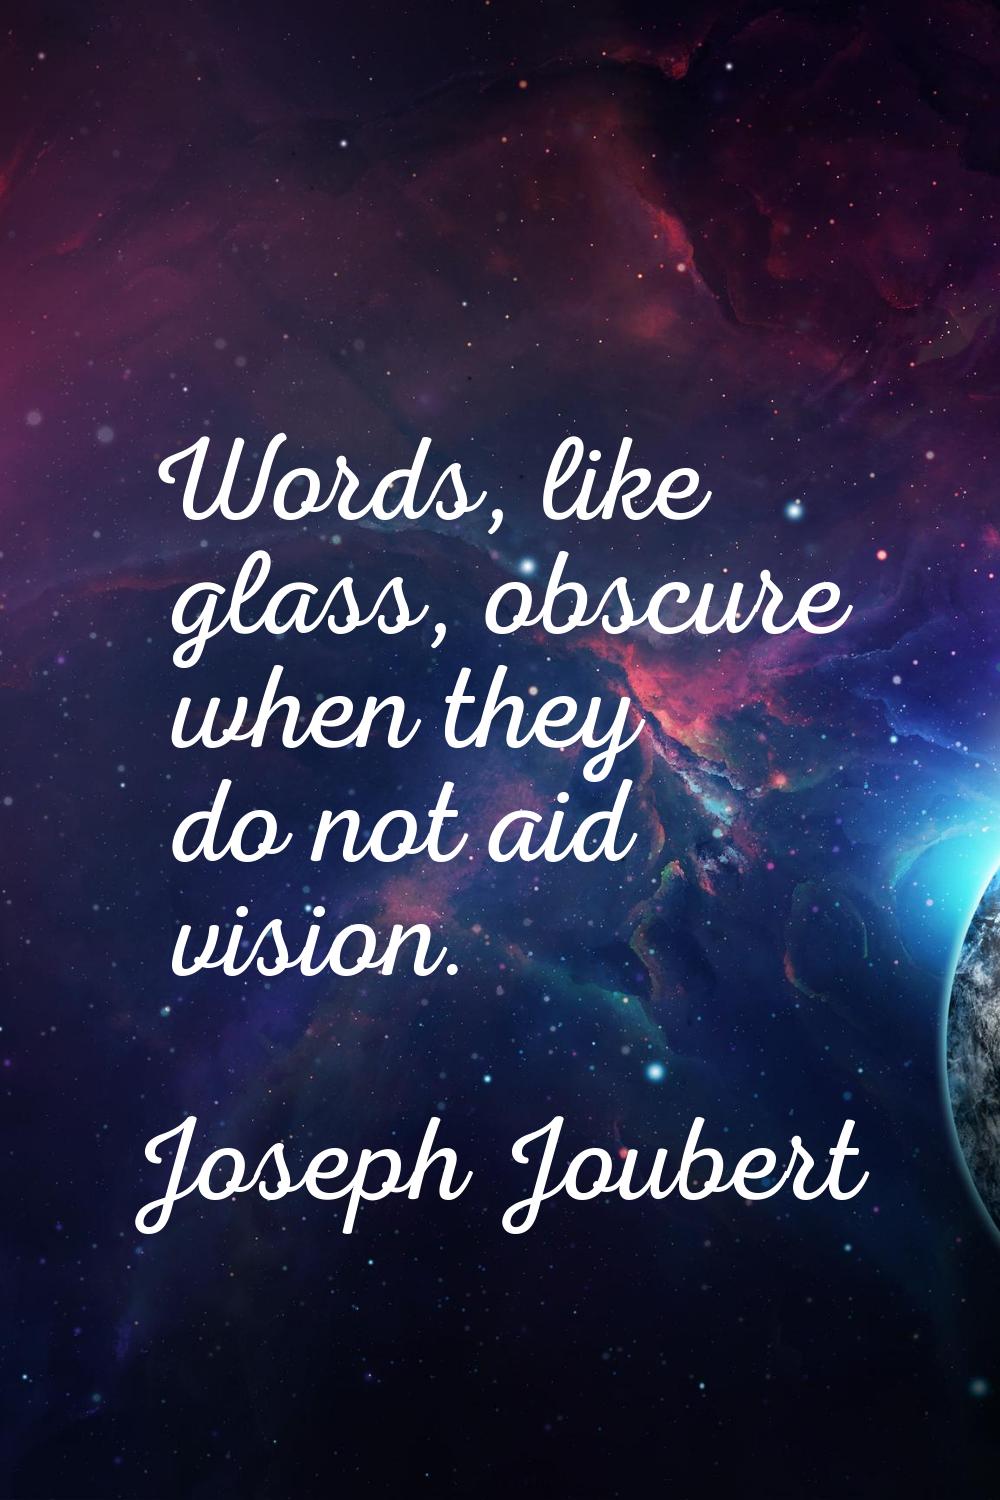 Words, like glass, obscure when they do not aid vision.